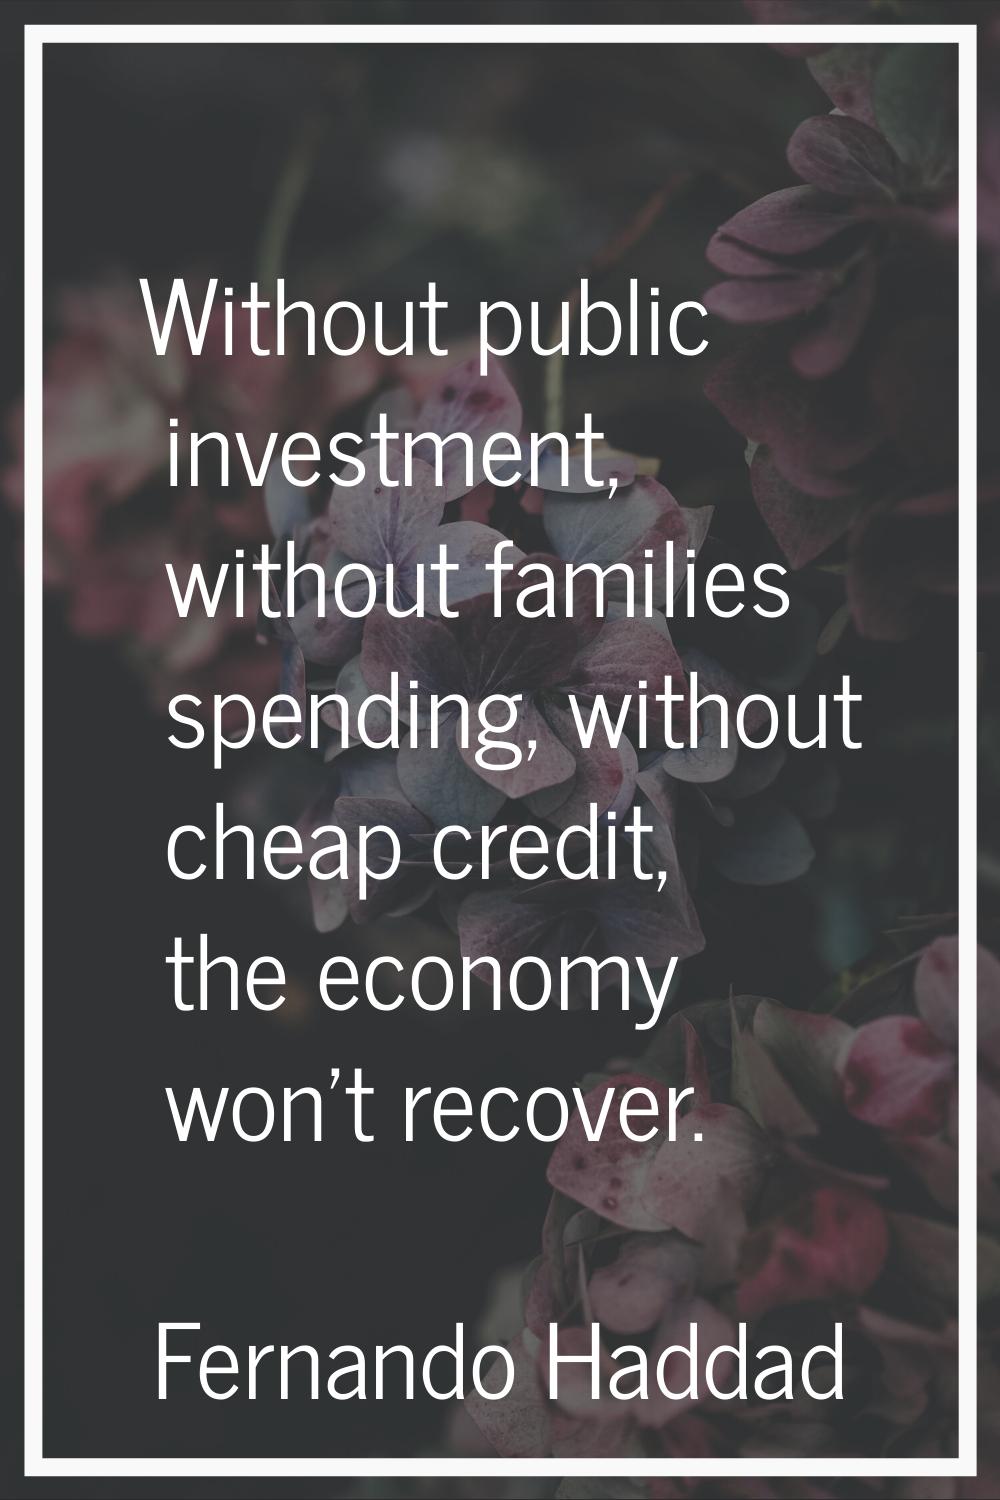 Without public investment, without families spending, without cheap credit, the economy won't recov